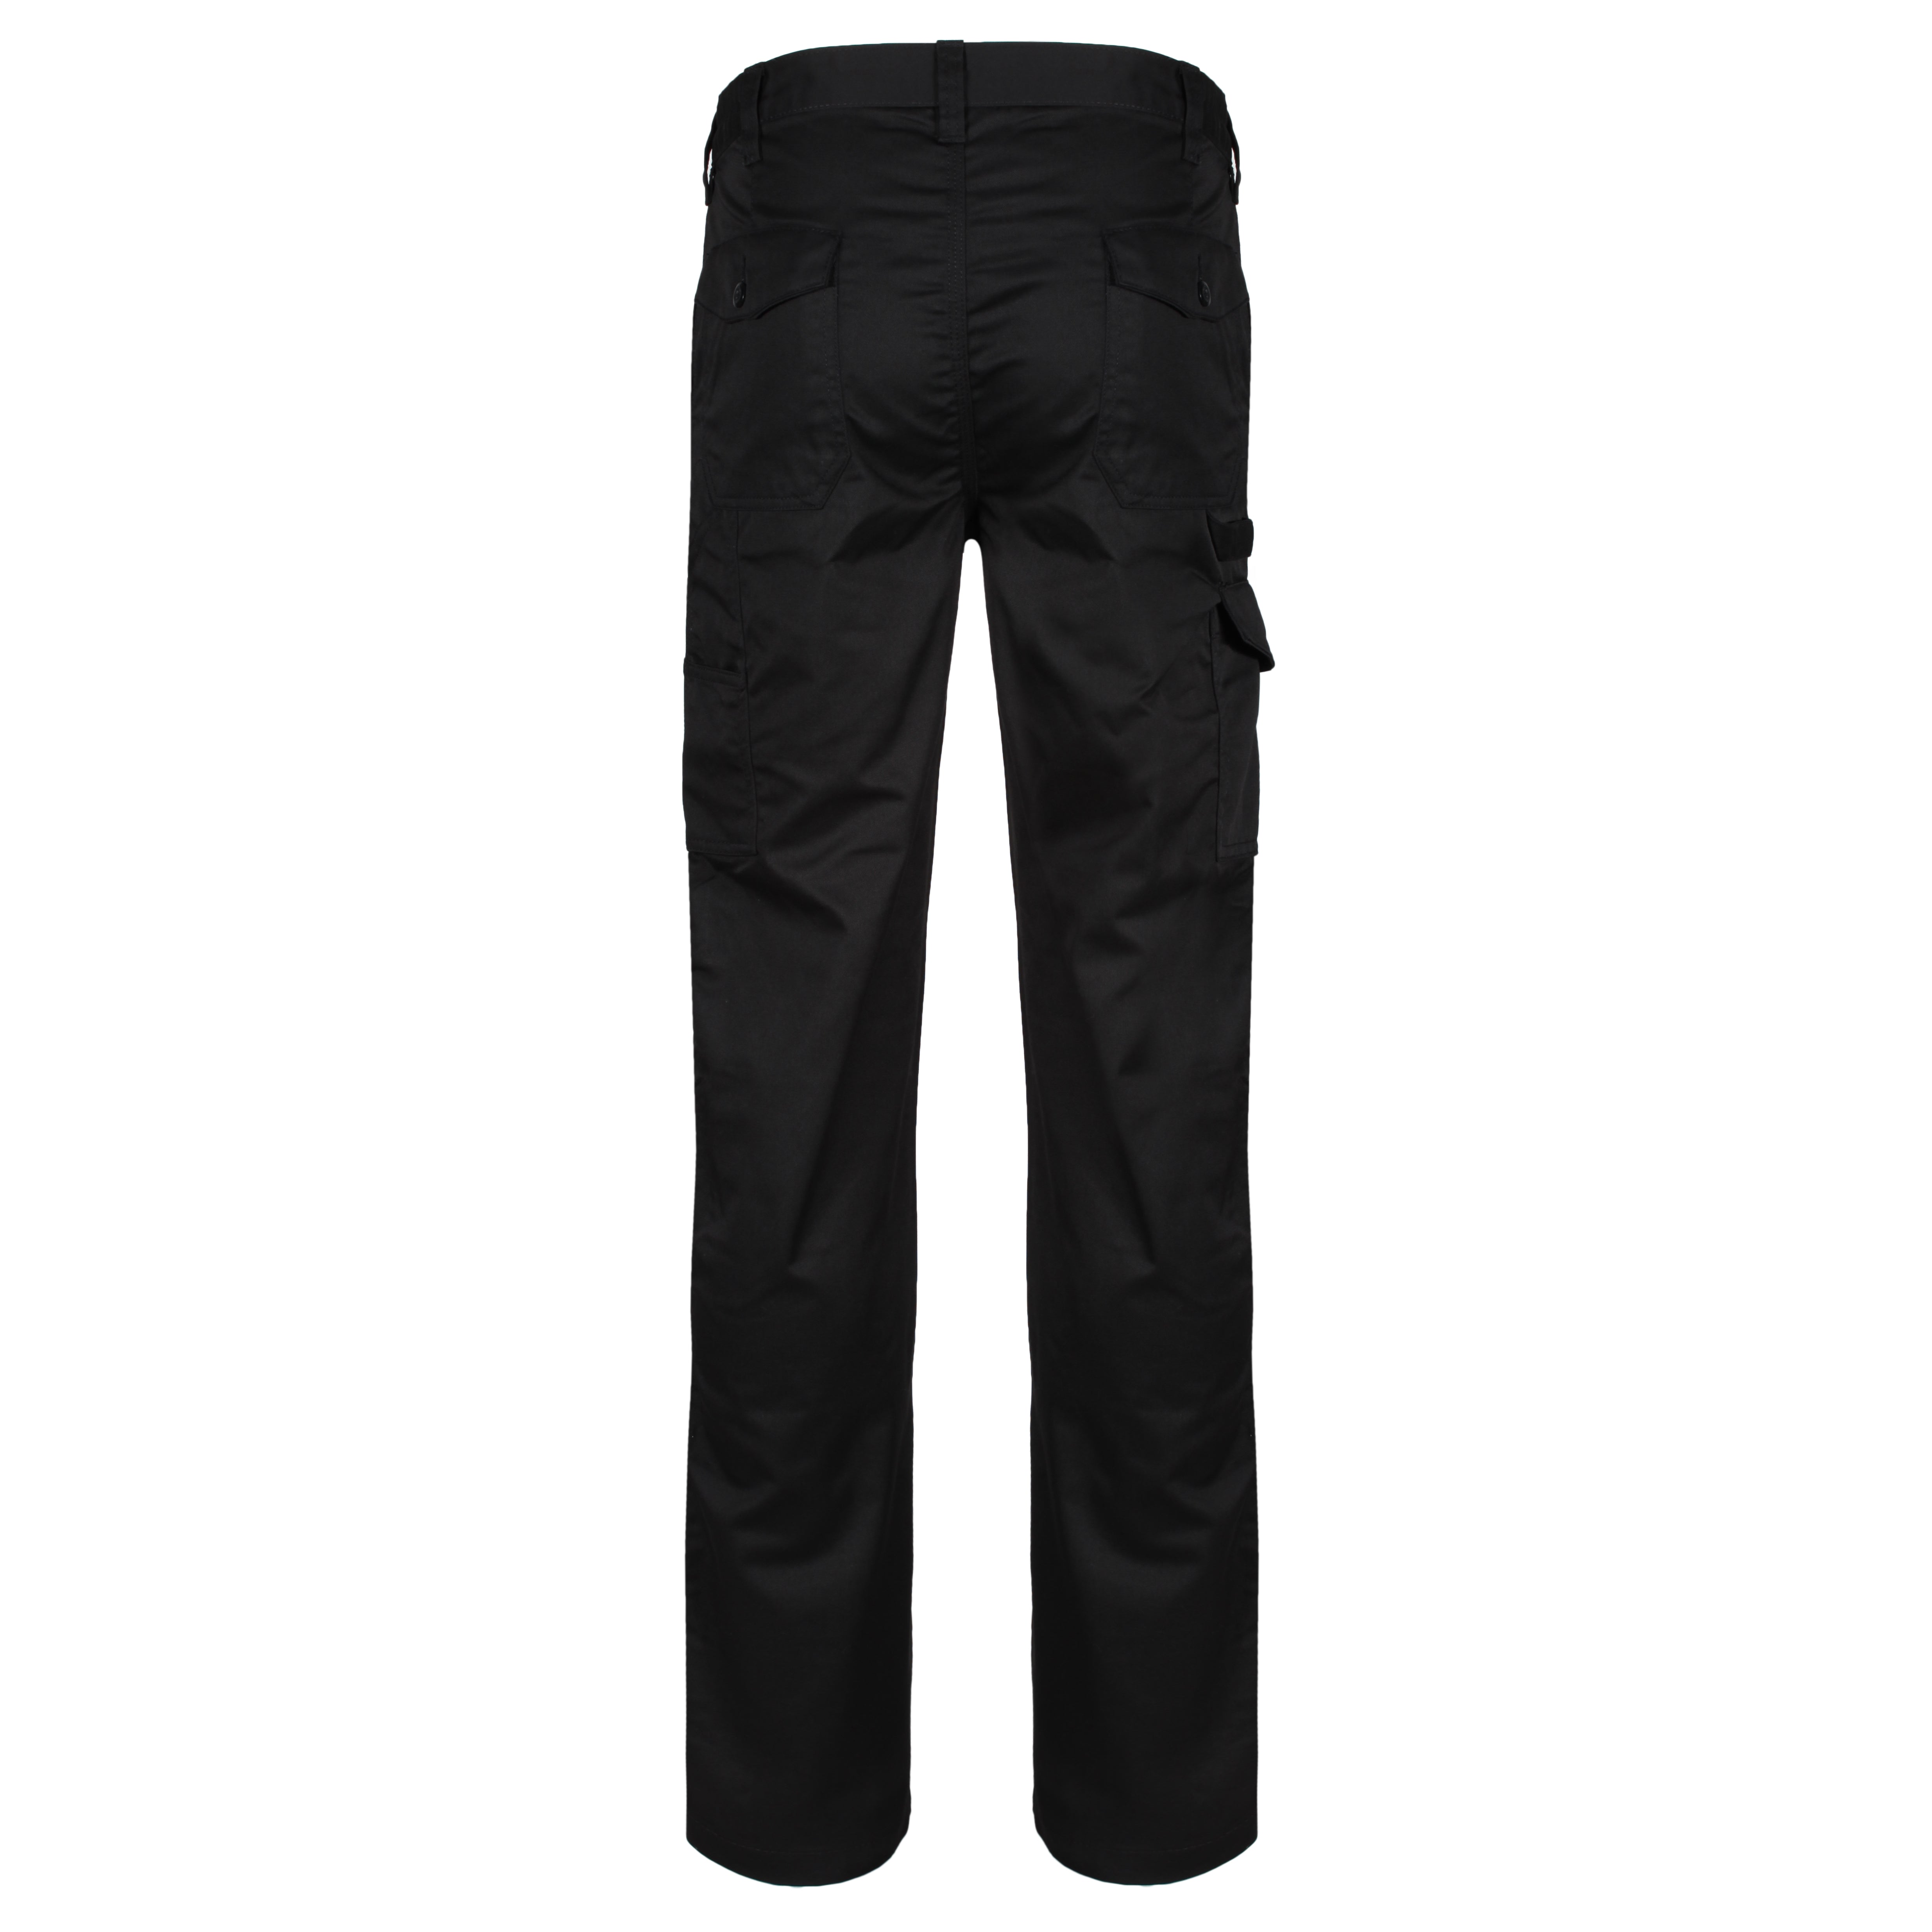 Buy ProJob Prio work trousers 5532 at Cheap-workwear.com